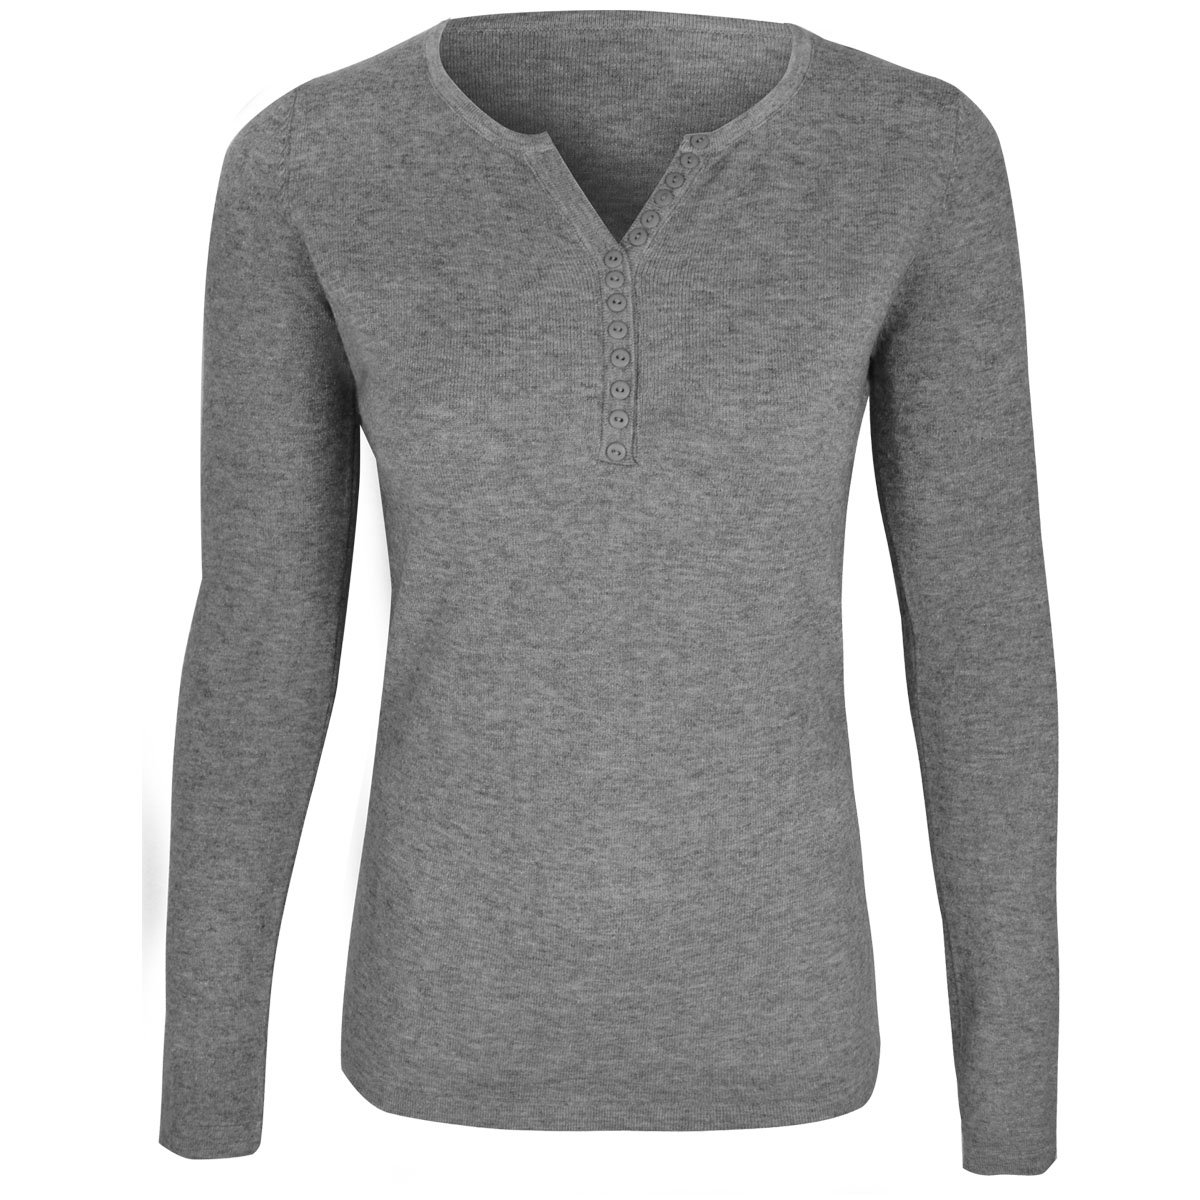 Womens Ladies Jumper Sweater Thick Winter Top Long Sleeve Casual Plain ...